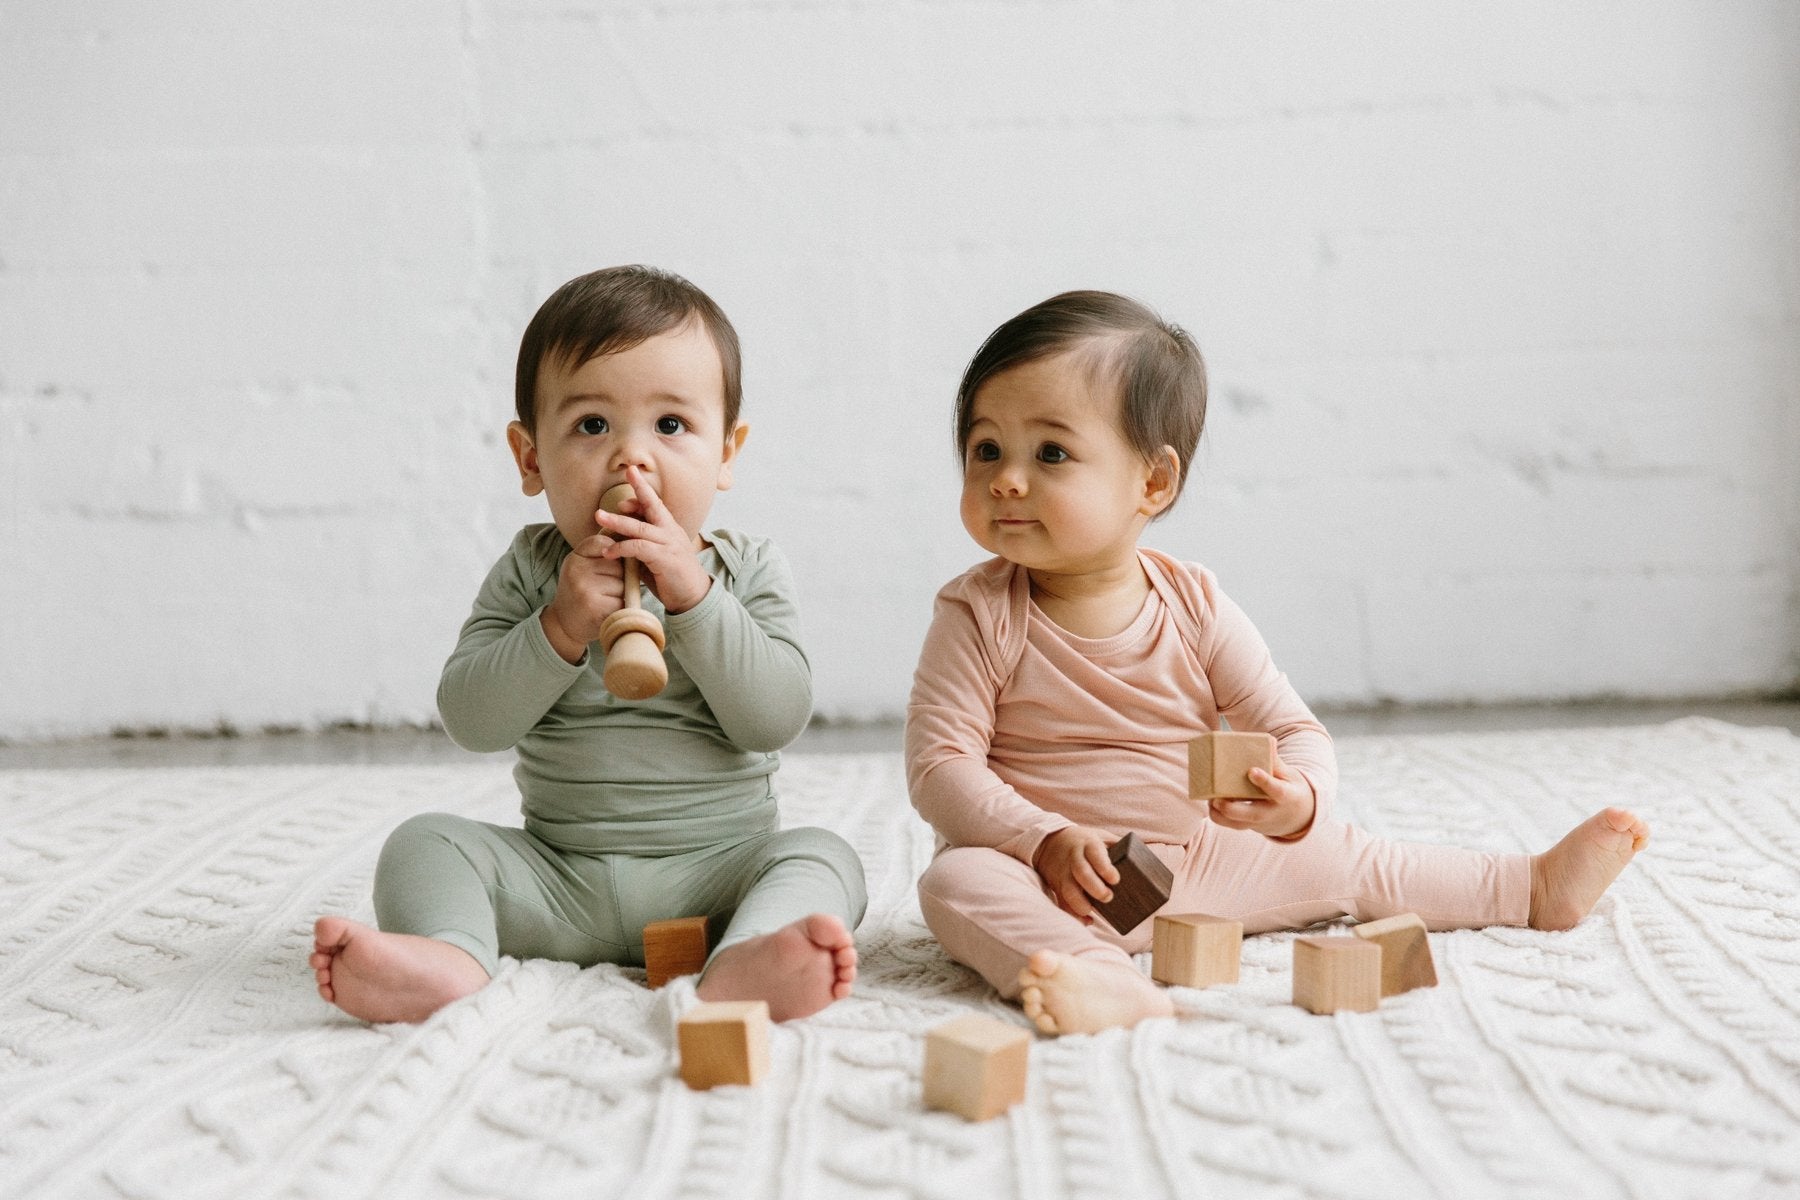 Mom-preneur and Founder of Bannor Toys Interview-Amara Organic Foods